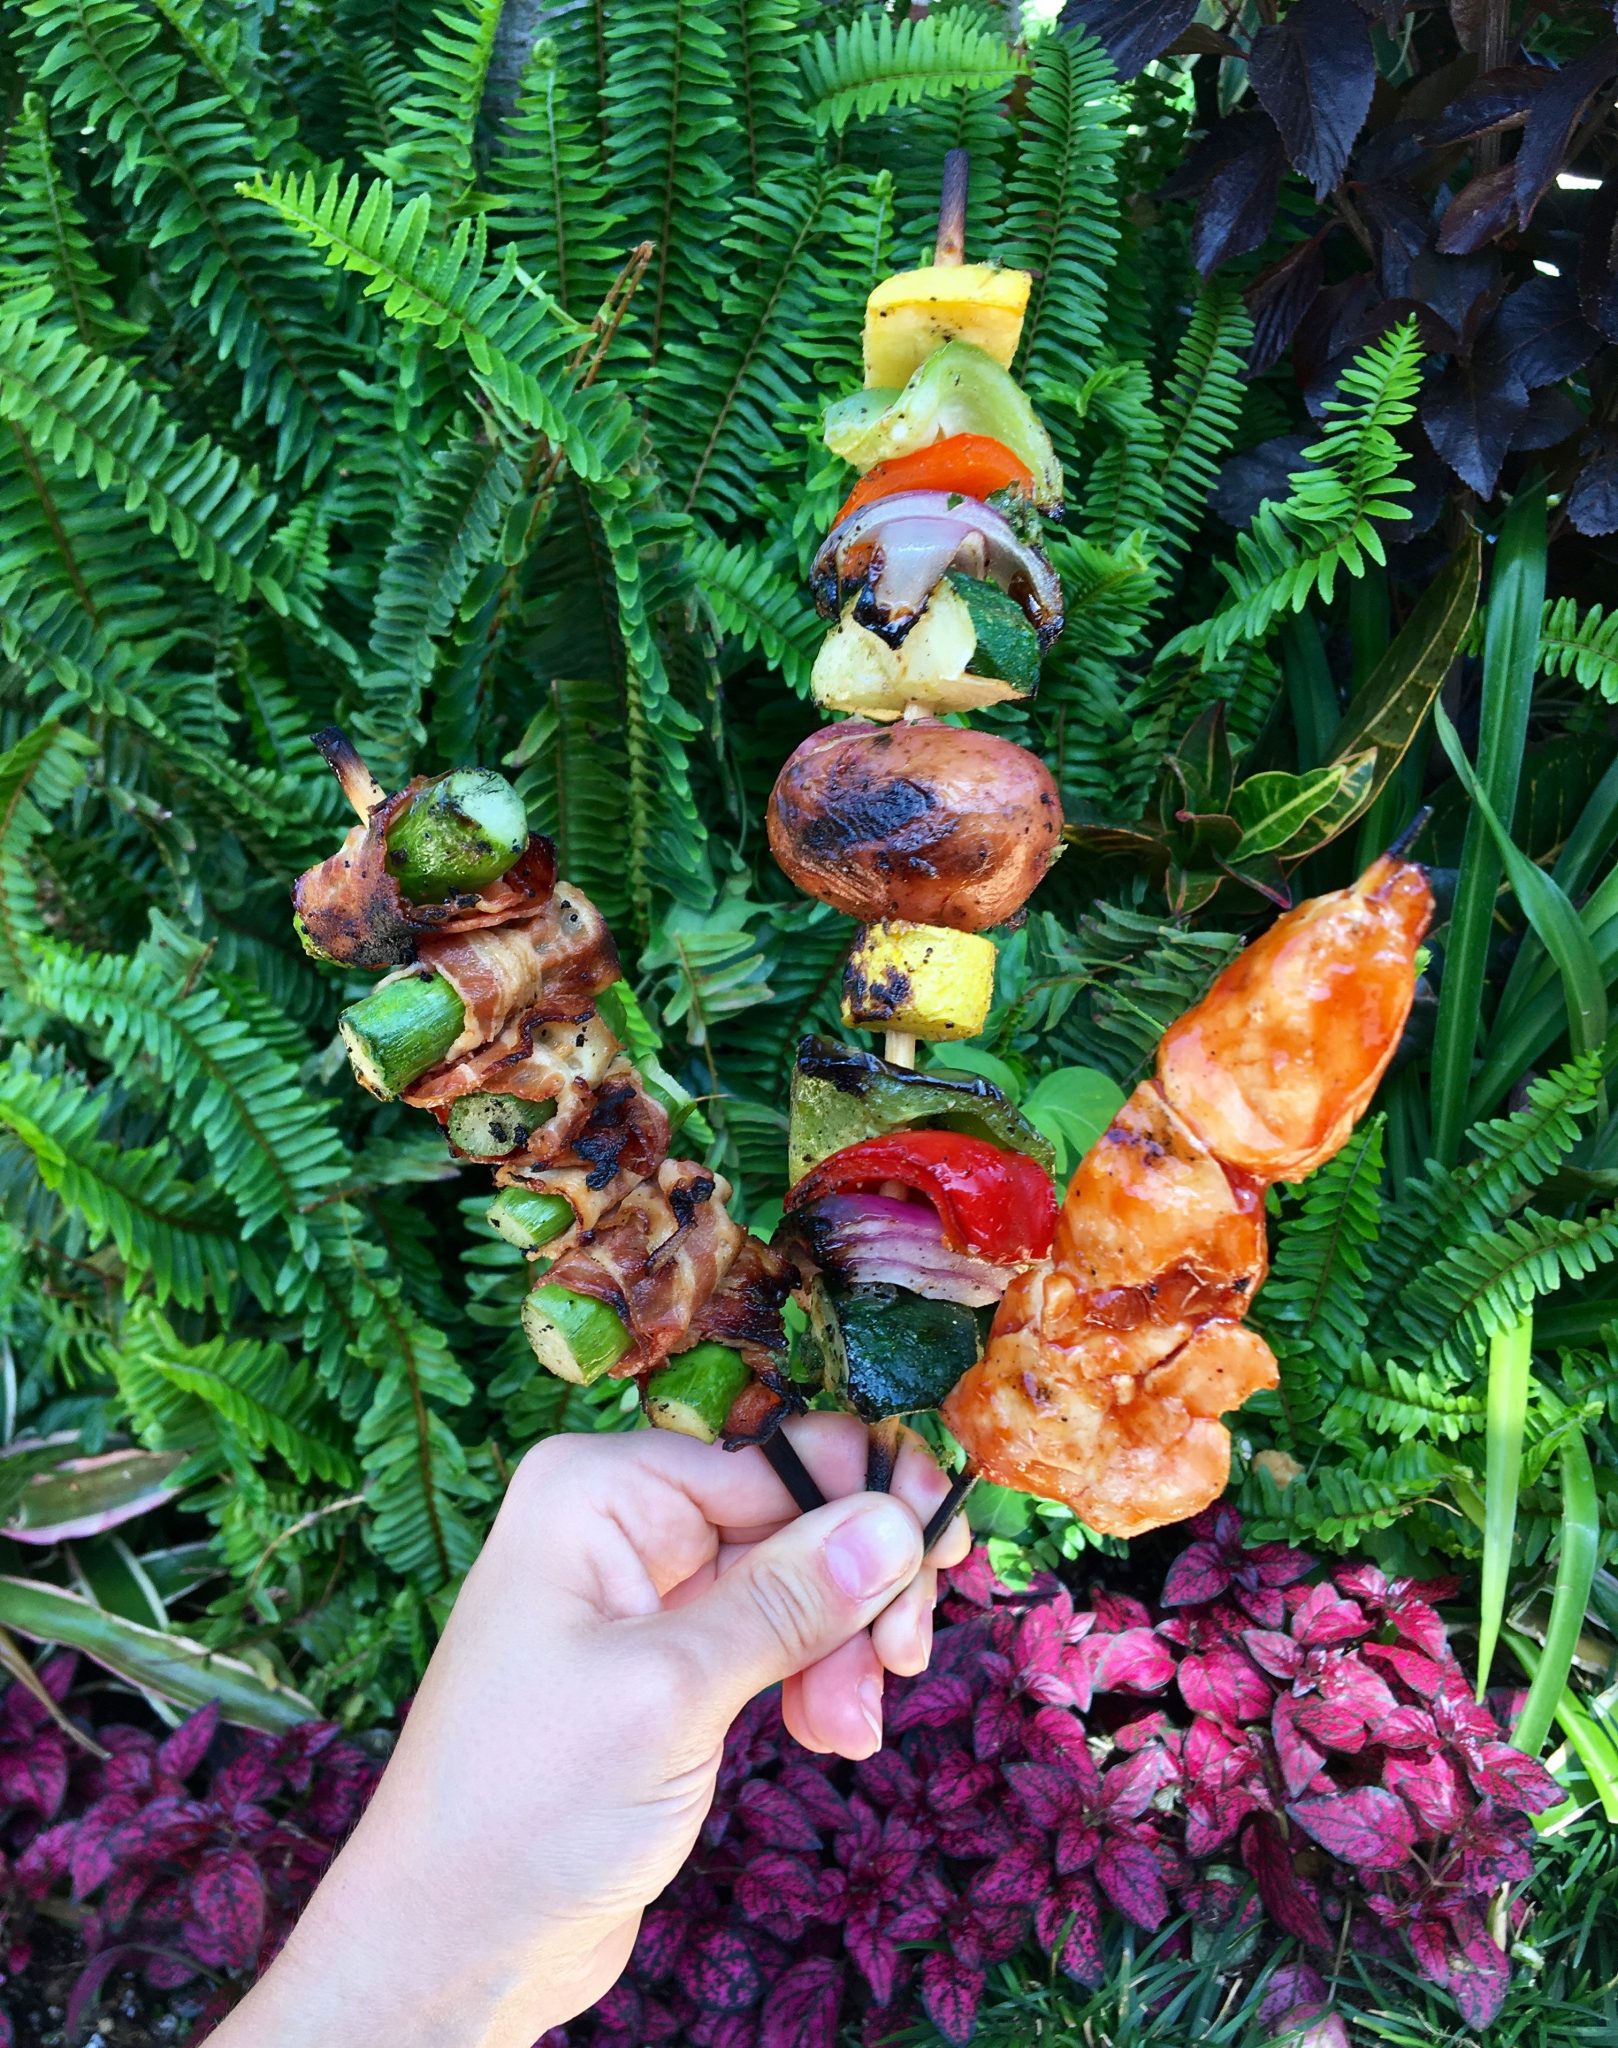 Bengal Barbecue at Disneyland Park Offers Delicious Outback Vegetable Skewers